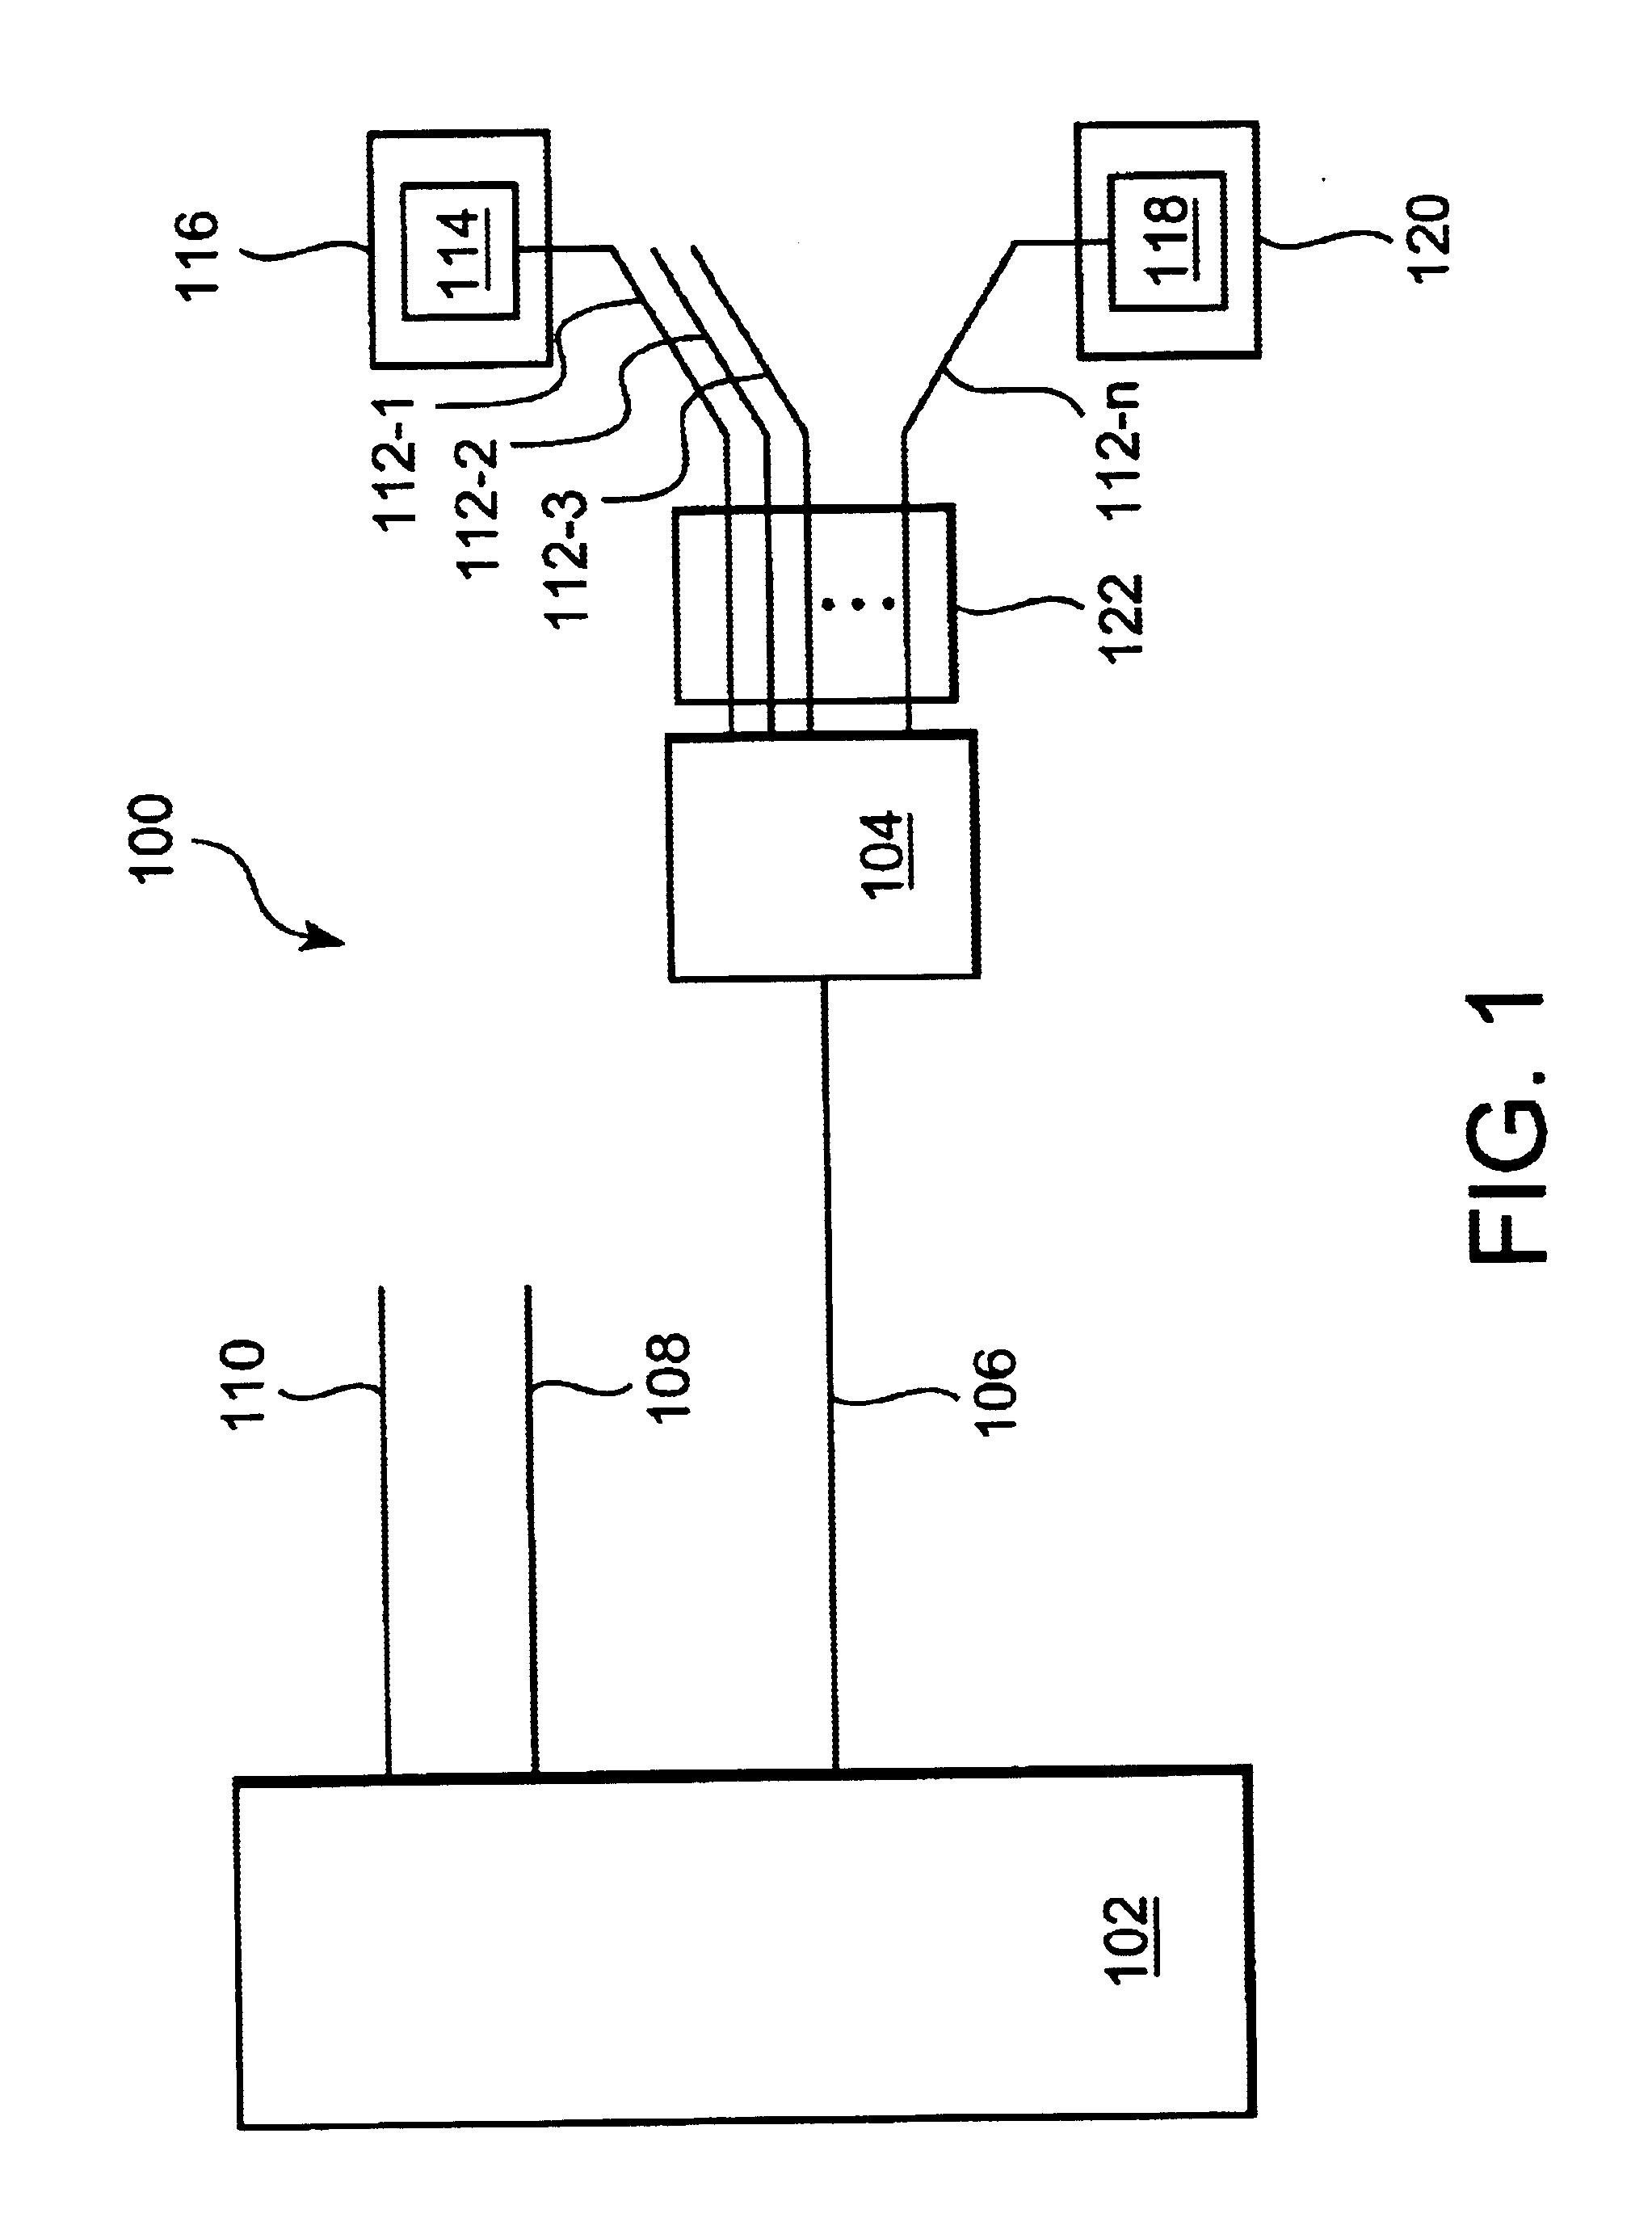 Method and device for reducing crosstalk interference